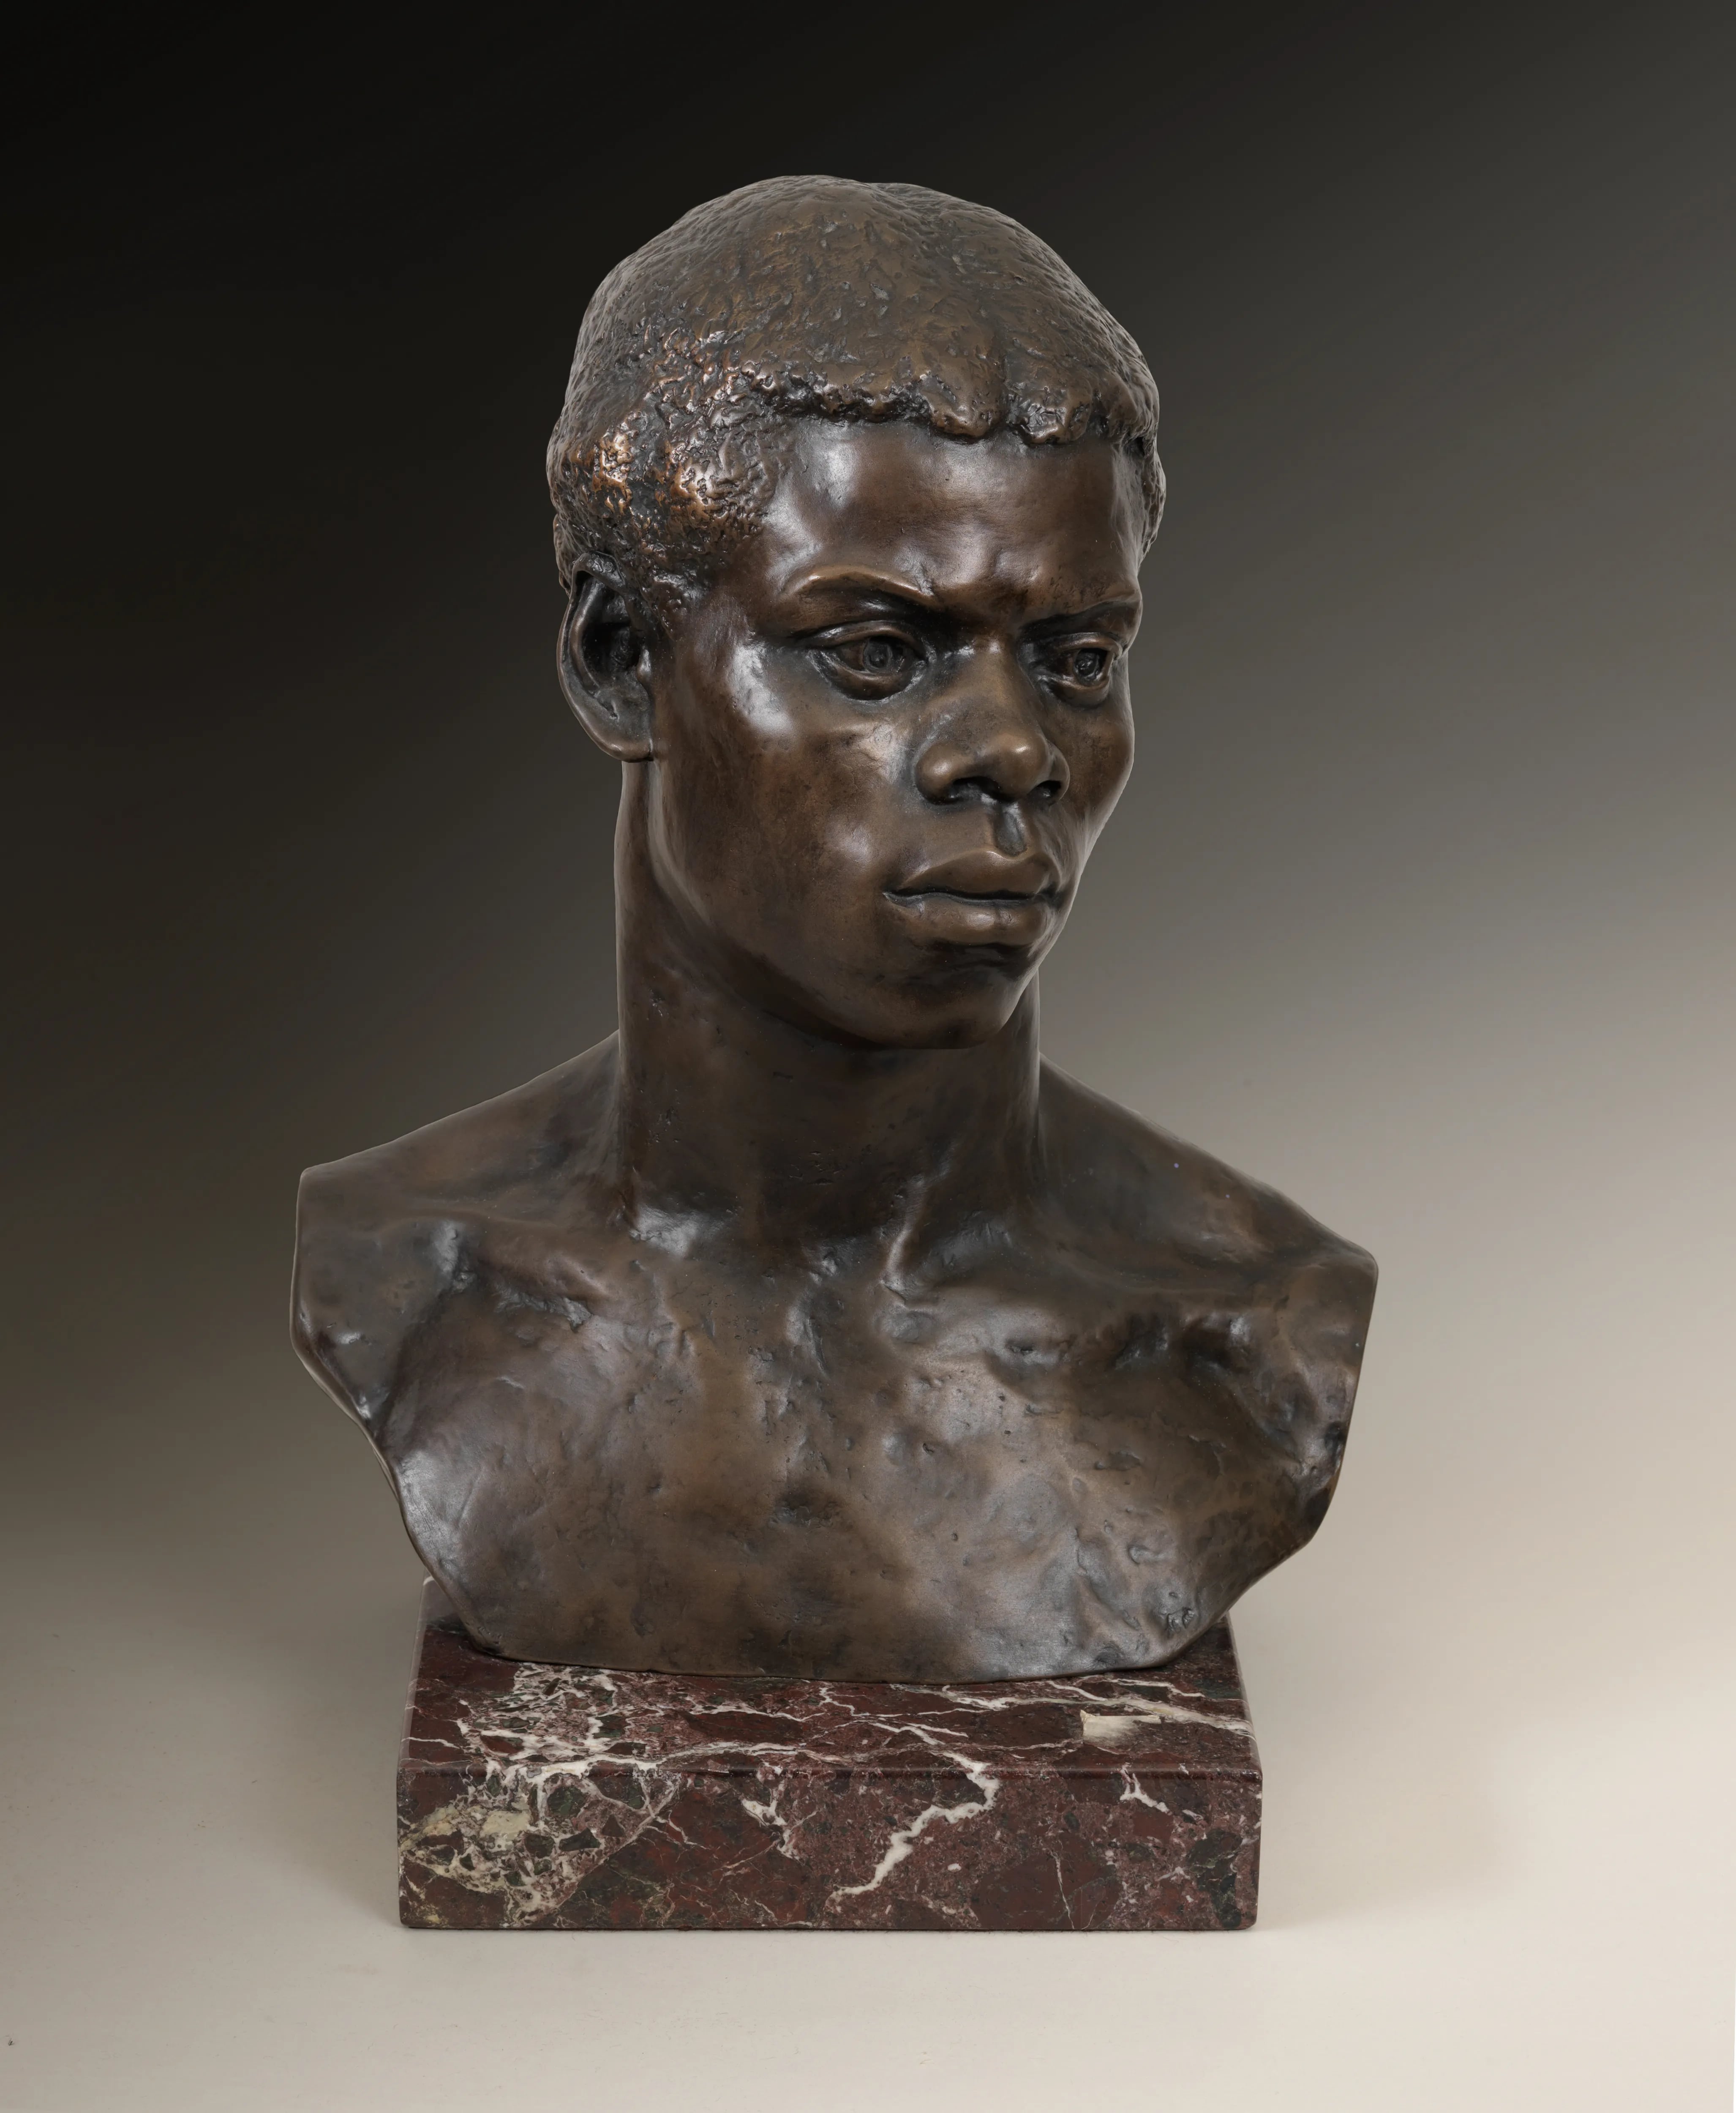 "Slave Boy," by May Howard Jackson, on display as part of PAFA's Making American Artists: Stories from PAFA 1776-1976, which is on till April 2, 2023.